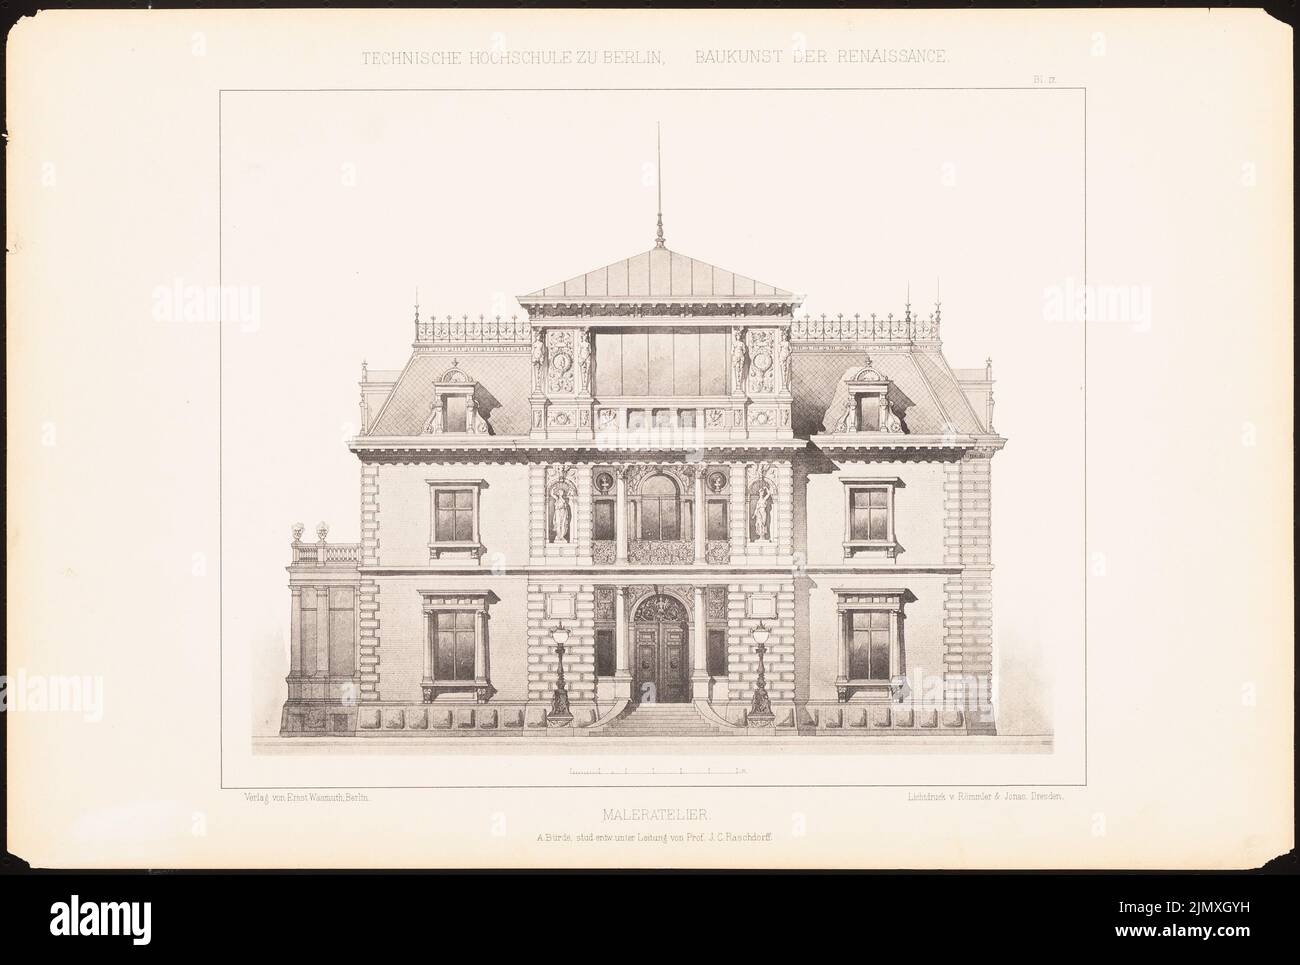 Bürde Alfred, painter studio. (From: J.C. Raschdorff, architecture of the Renaissance, 1881.) (1881-1881): View from the front. Light pressure on paper, 32.8 x 48.8 cm (including scan edges) Stock Photo